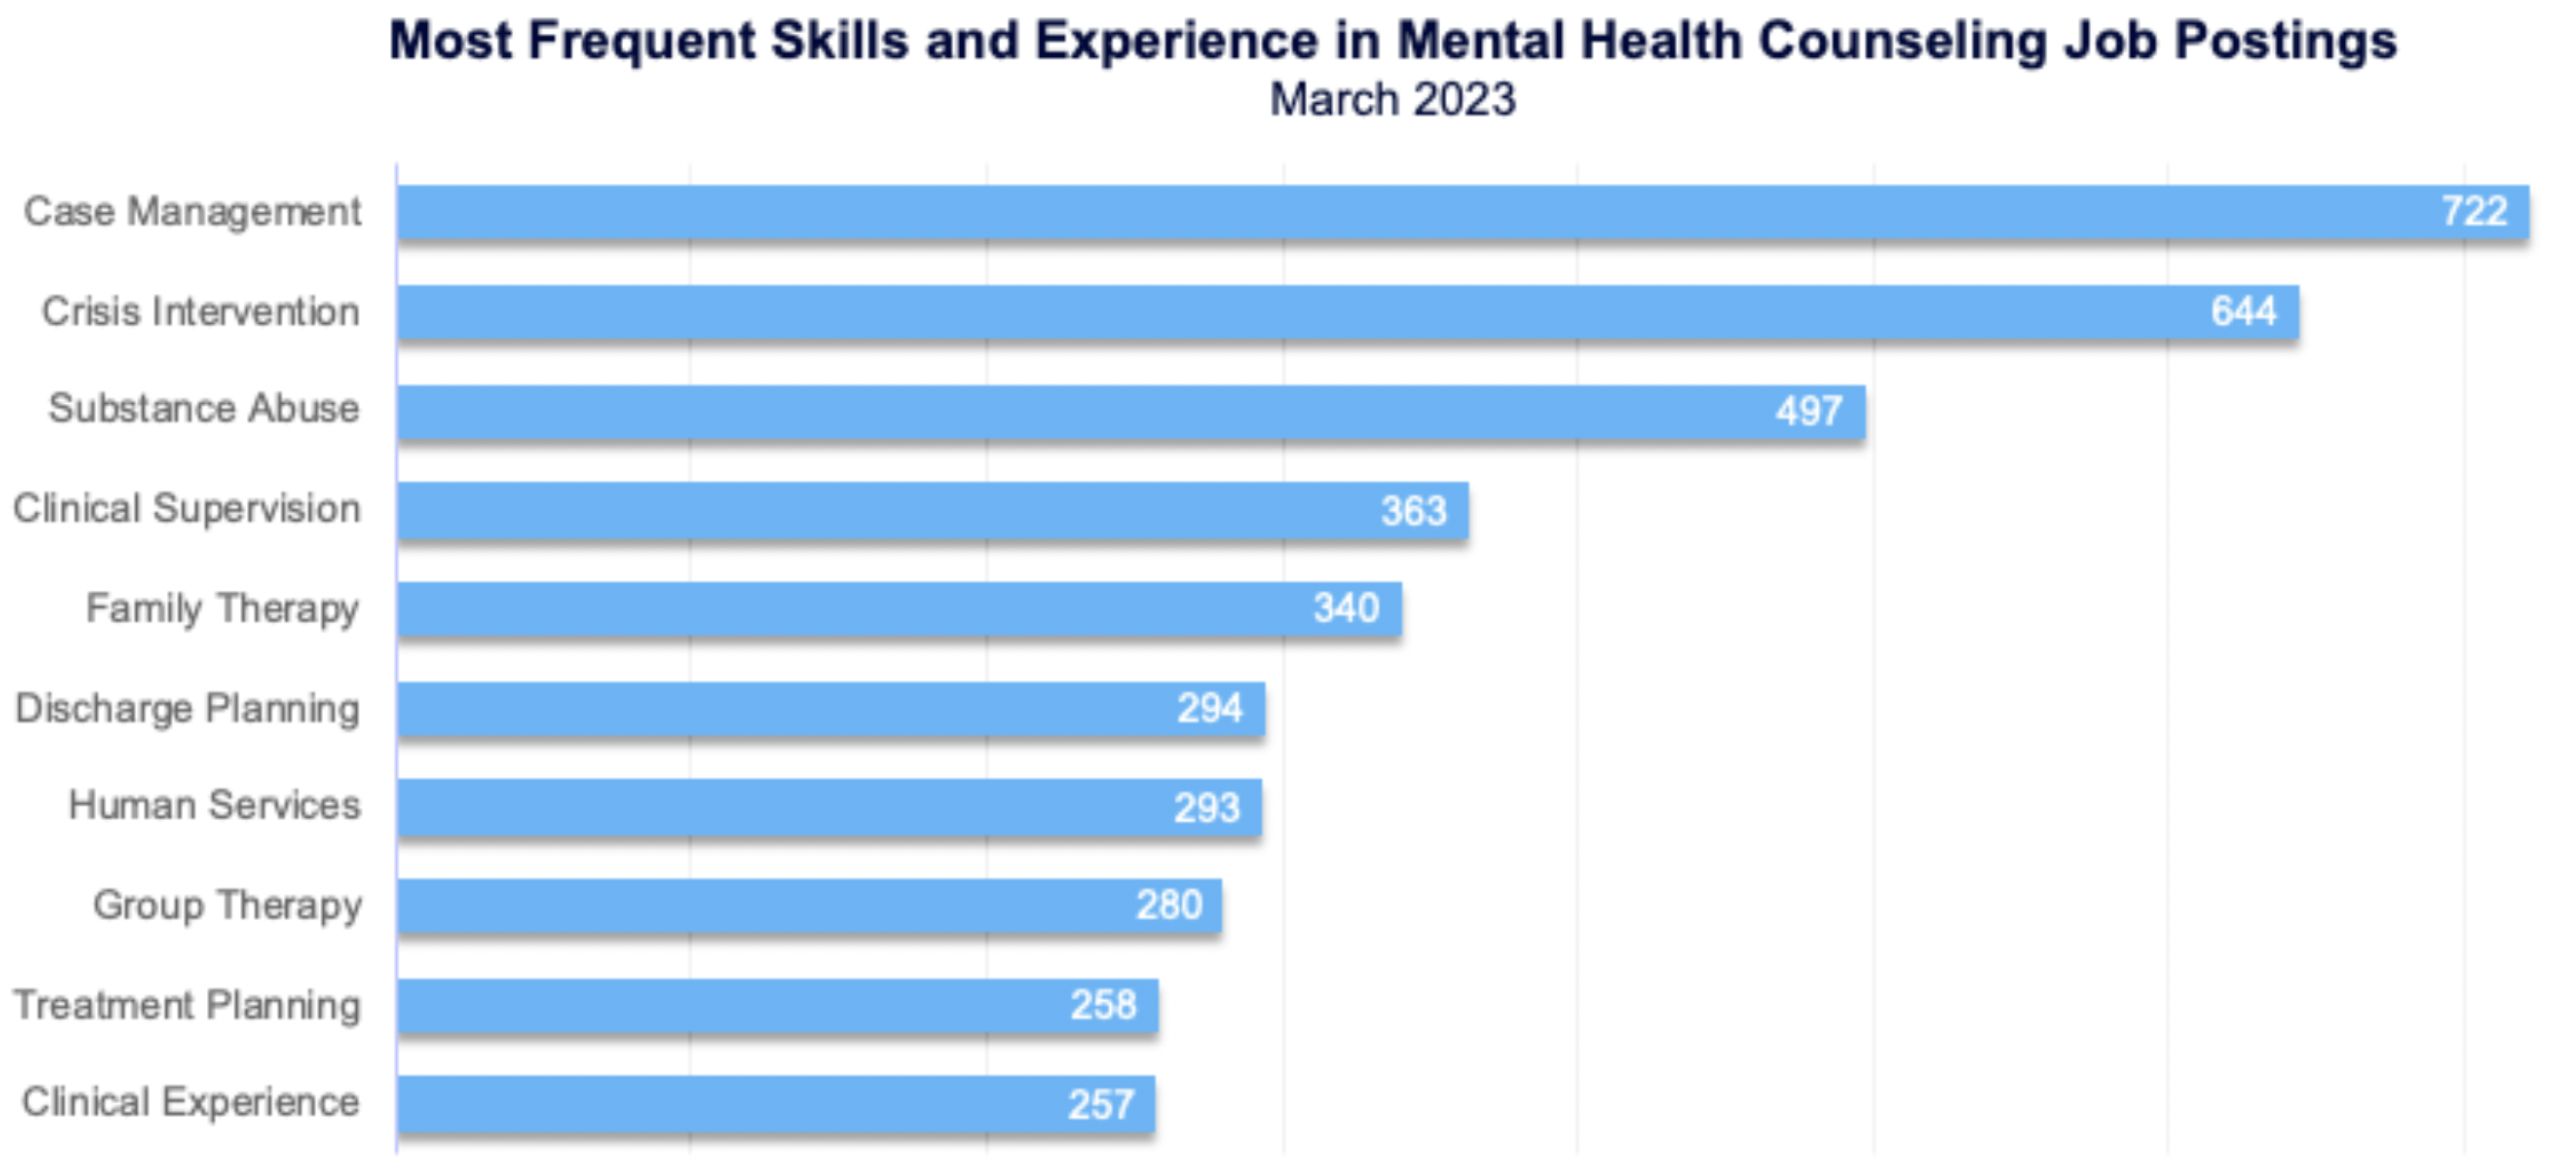 Most Frequent Skills and Experience in Mental Health Counseling Job Postings: March 2023